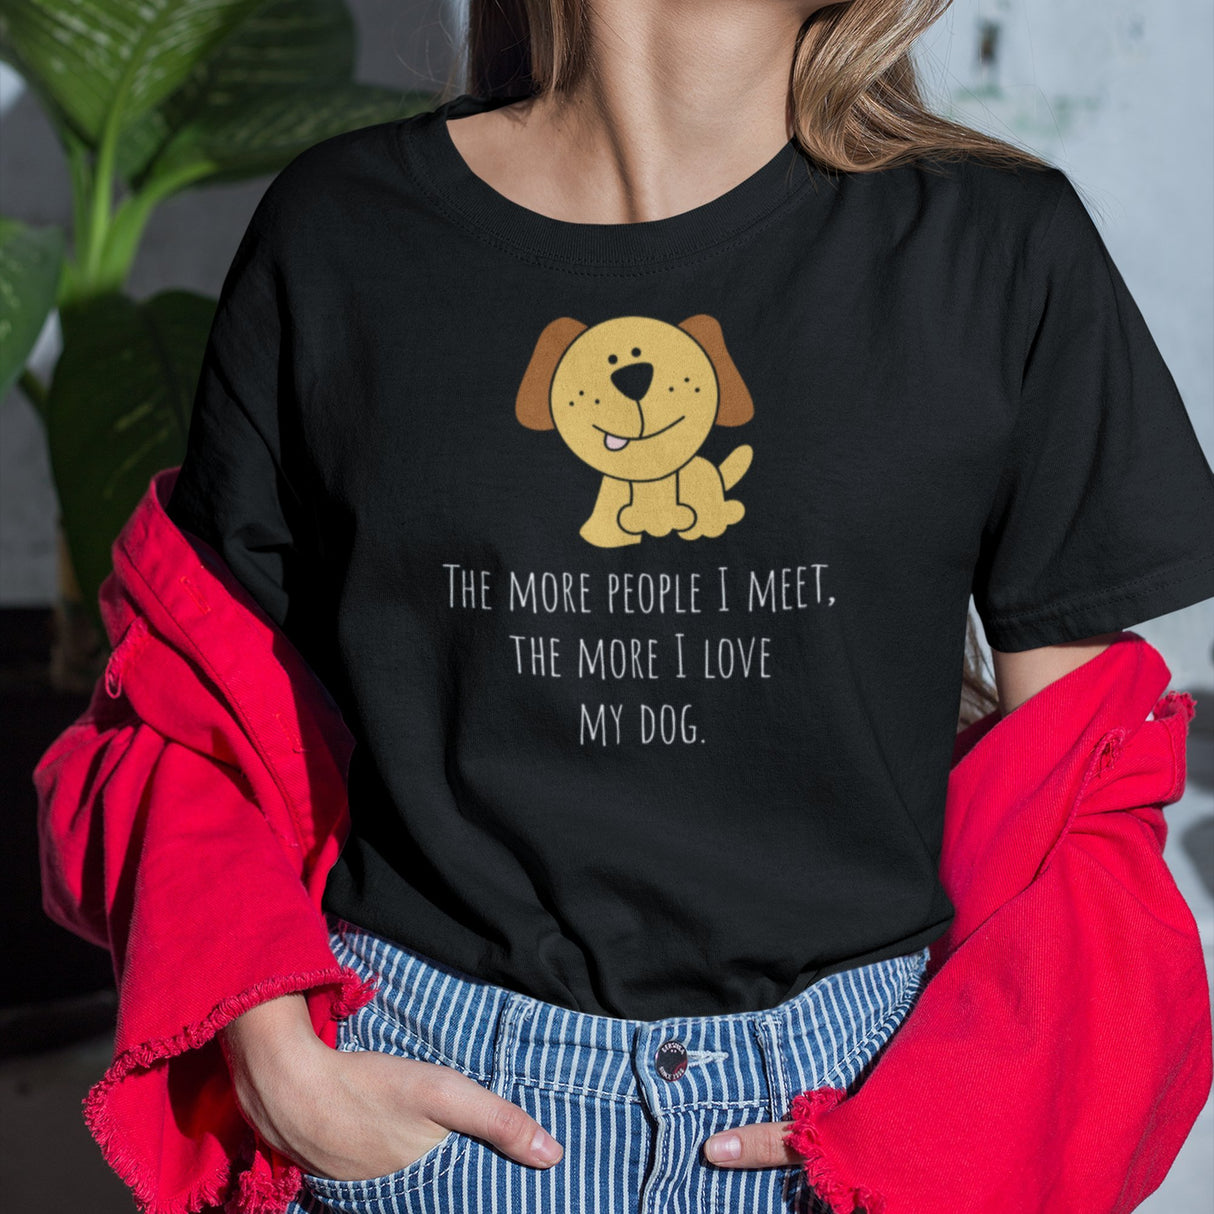 the-more-people-i-meet-the-more-i-love-my-dog-love-my-dog-tee-dog-t-shirt-dog-lover-tee-puppy-t-shirt-dog-mom-tee#color_black